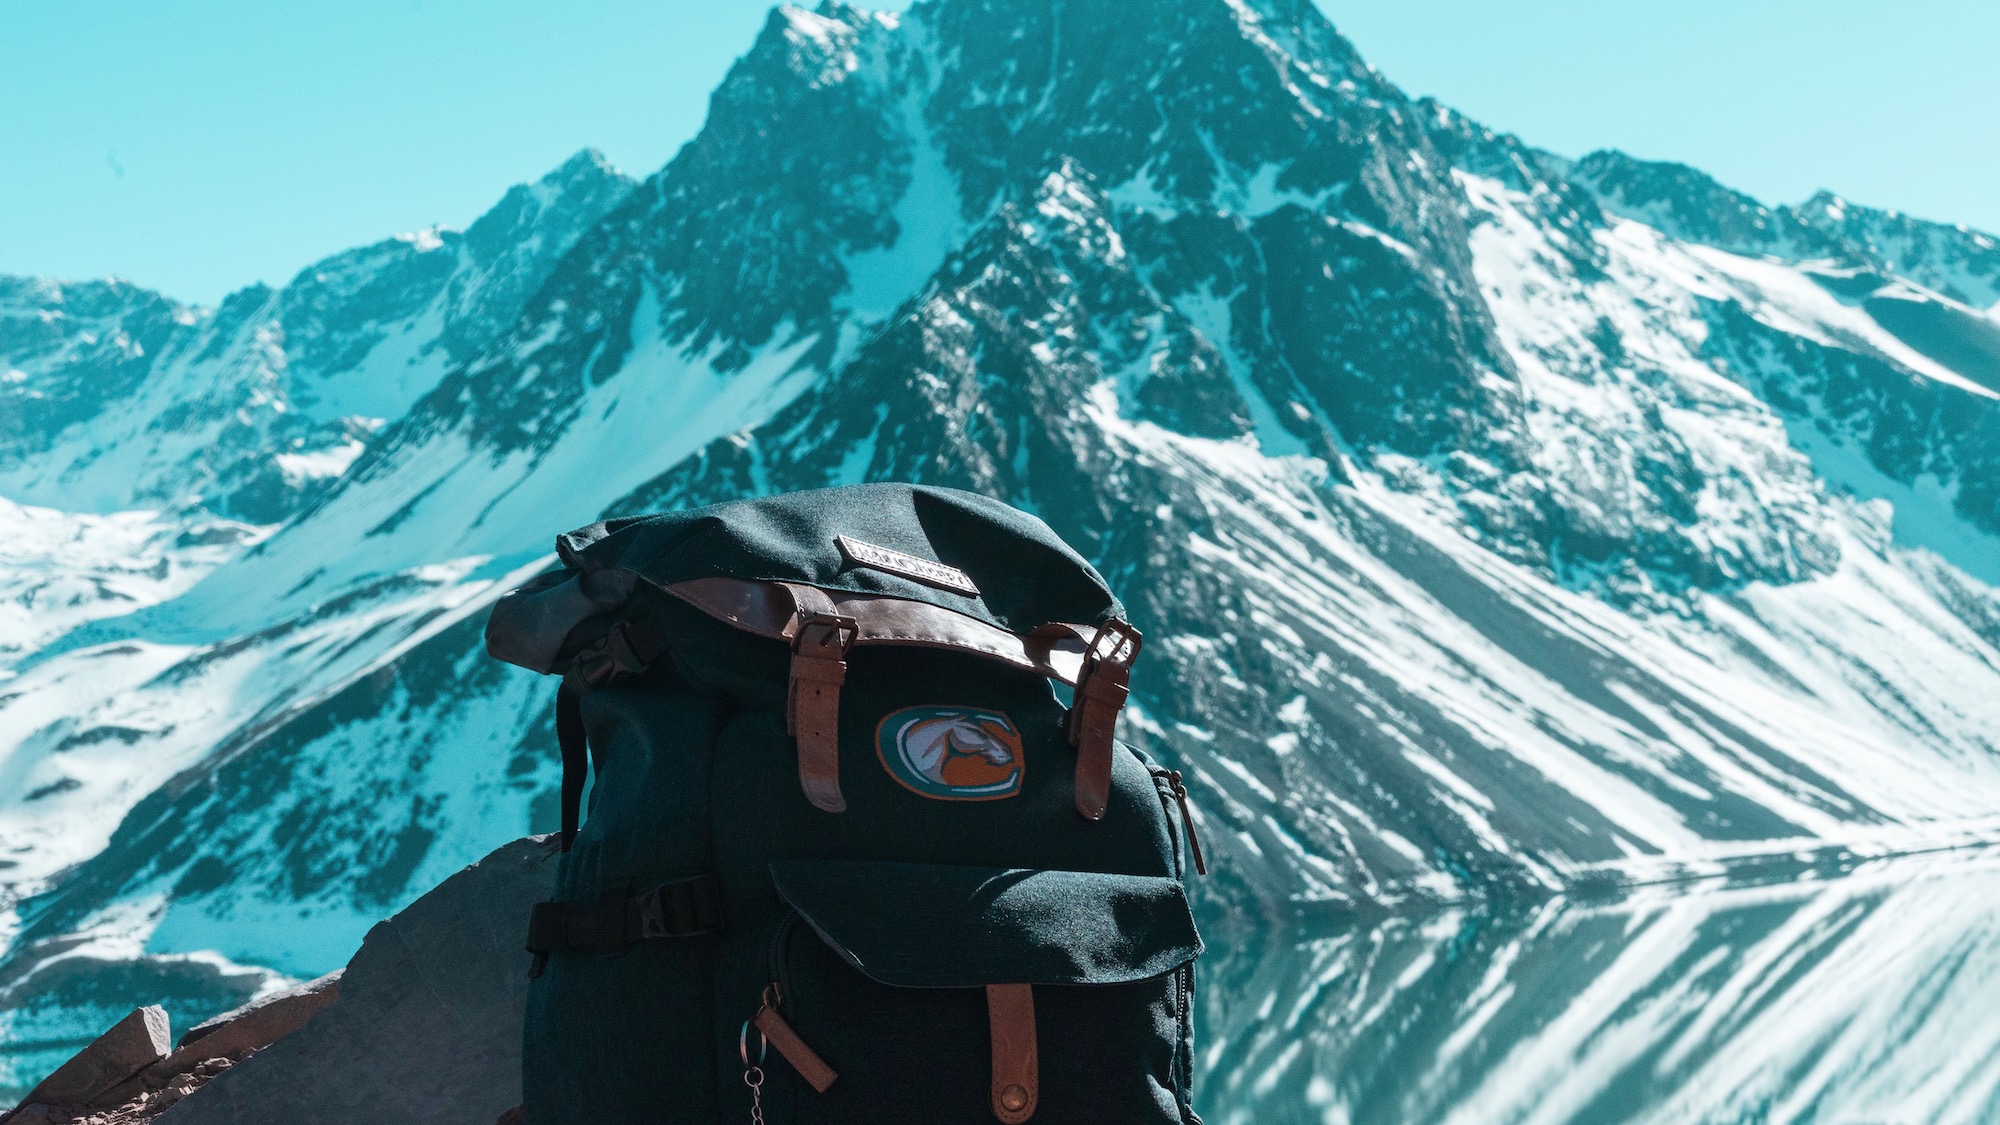 Aggie backpack with mountains in background